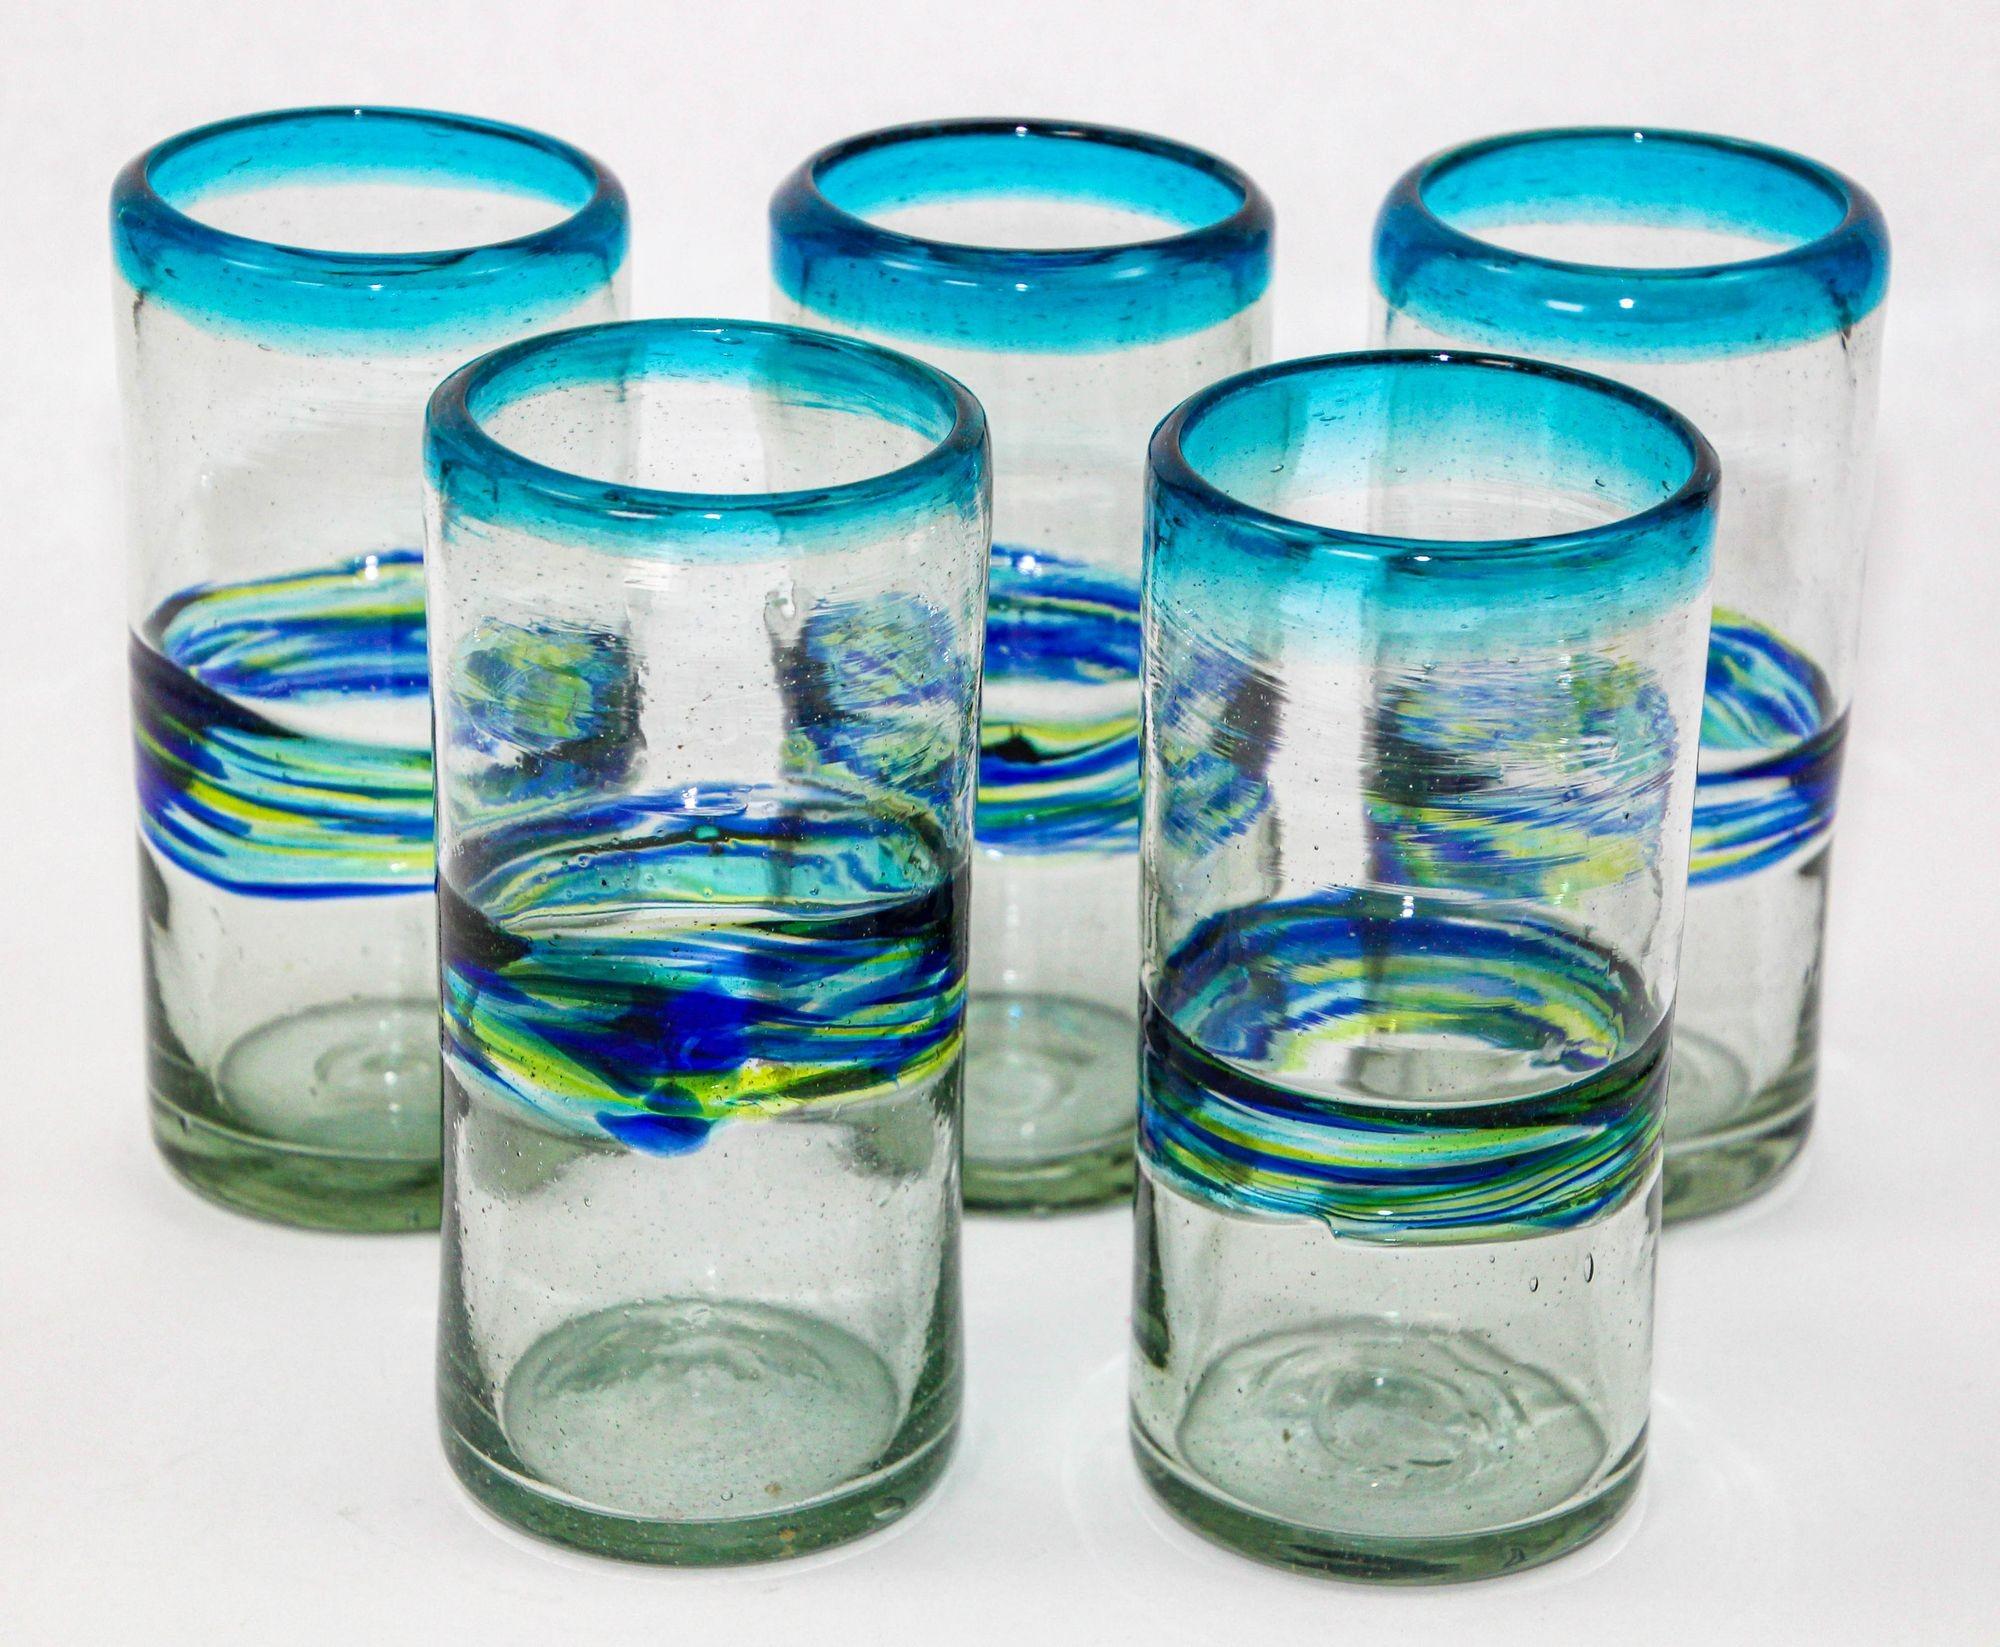 Set of 5 hand-blown vintage tumblers, each a testament to the skill of Mexican glass artists.
These glasses boast a mesmerizing blue and green swirl band, setting the stage for a unique and stylish addition to your barware collection.
Hand-crafted